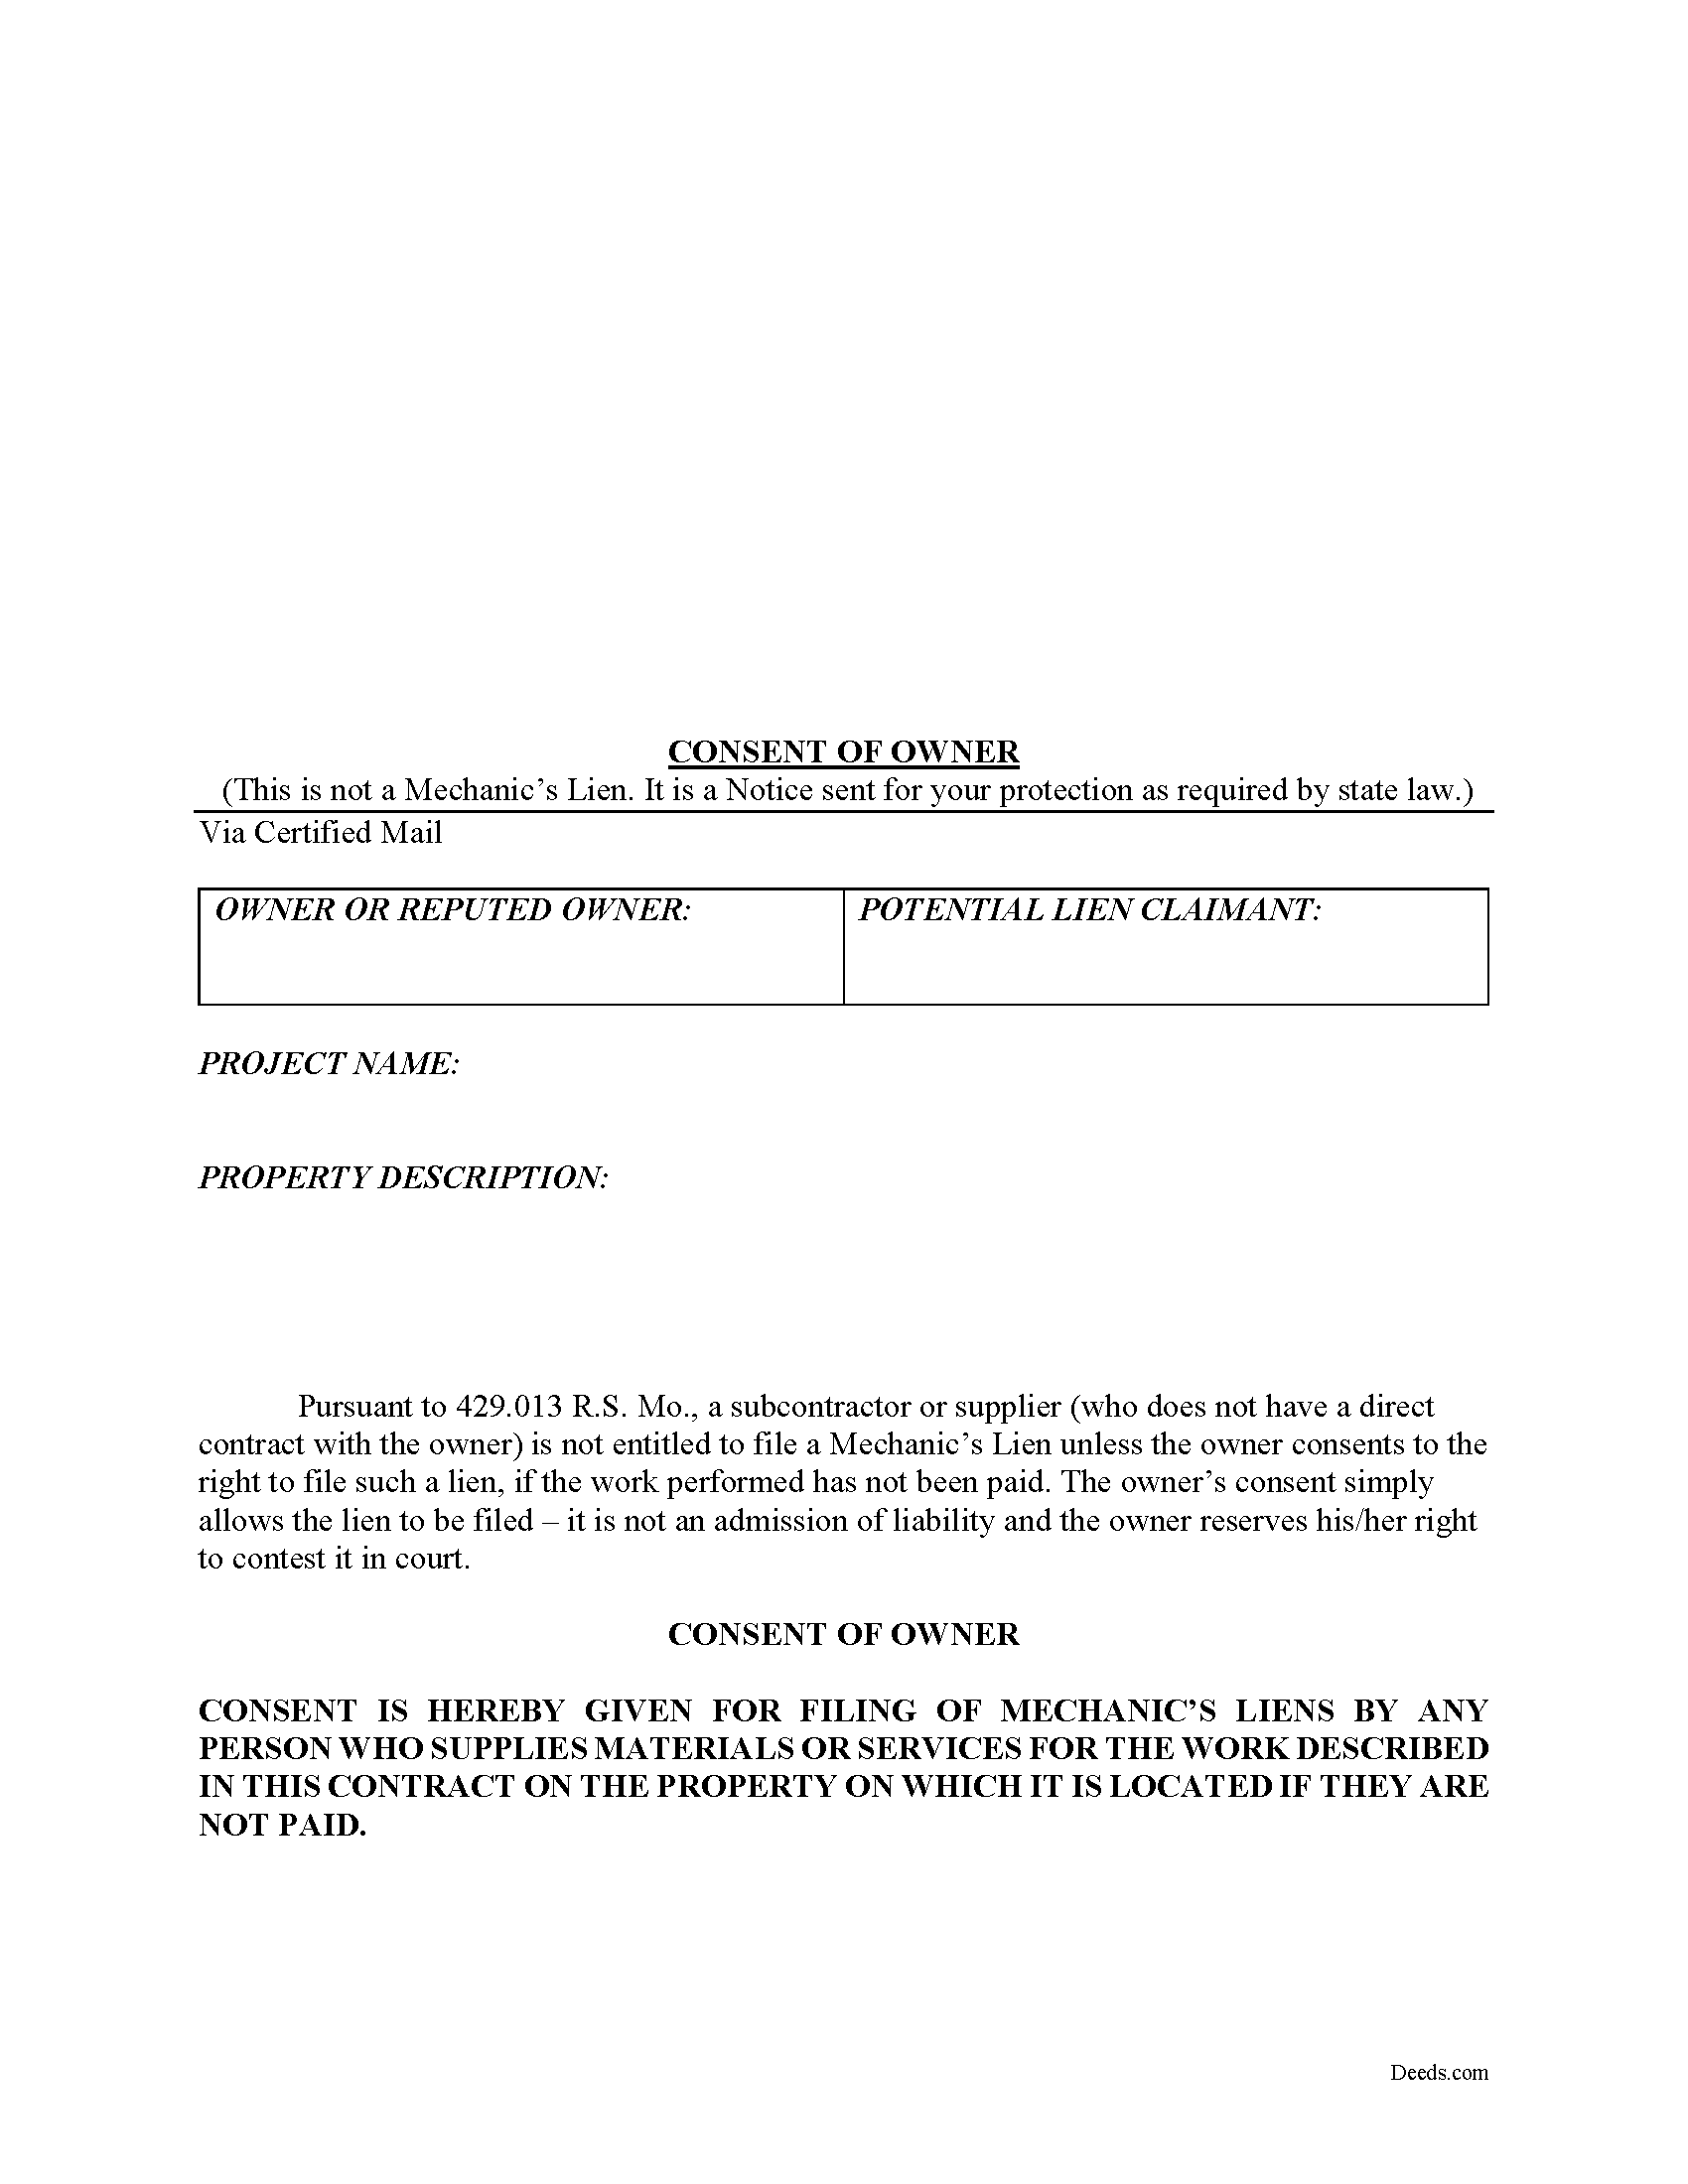 Consent of Owner Form